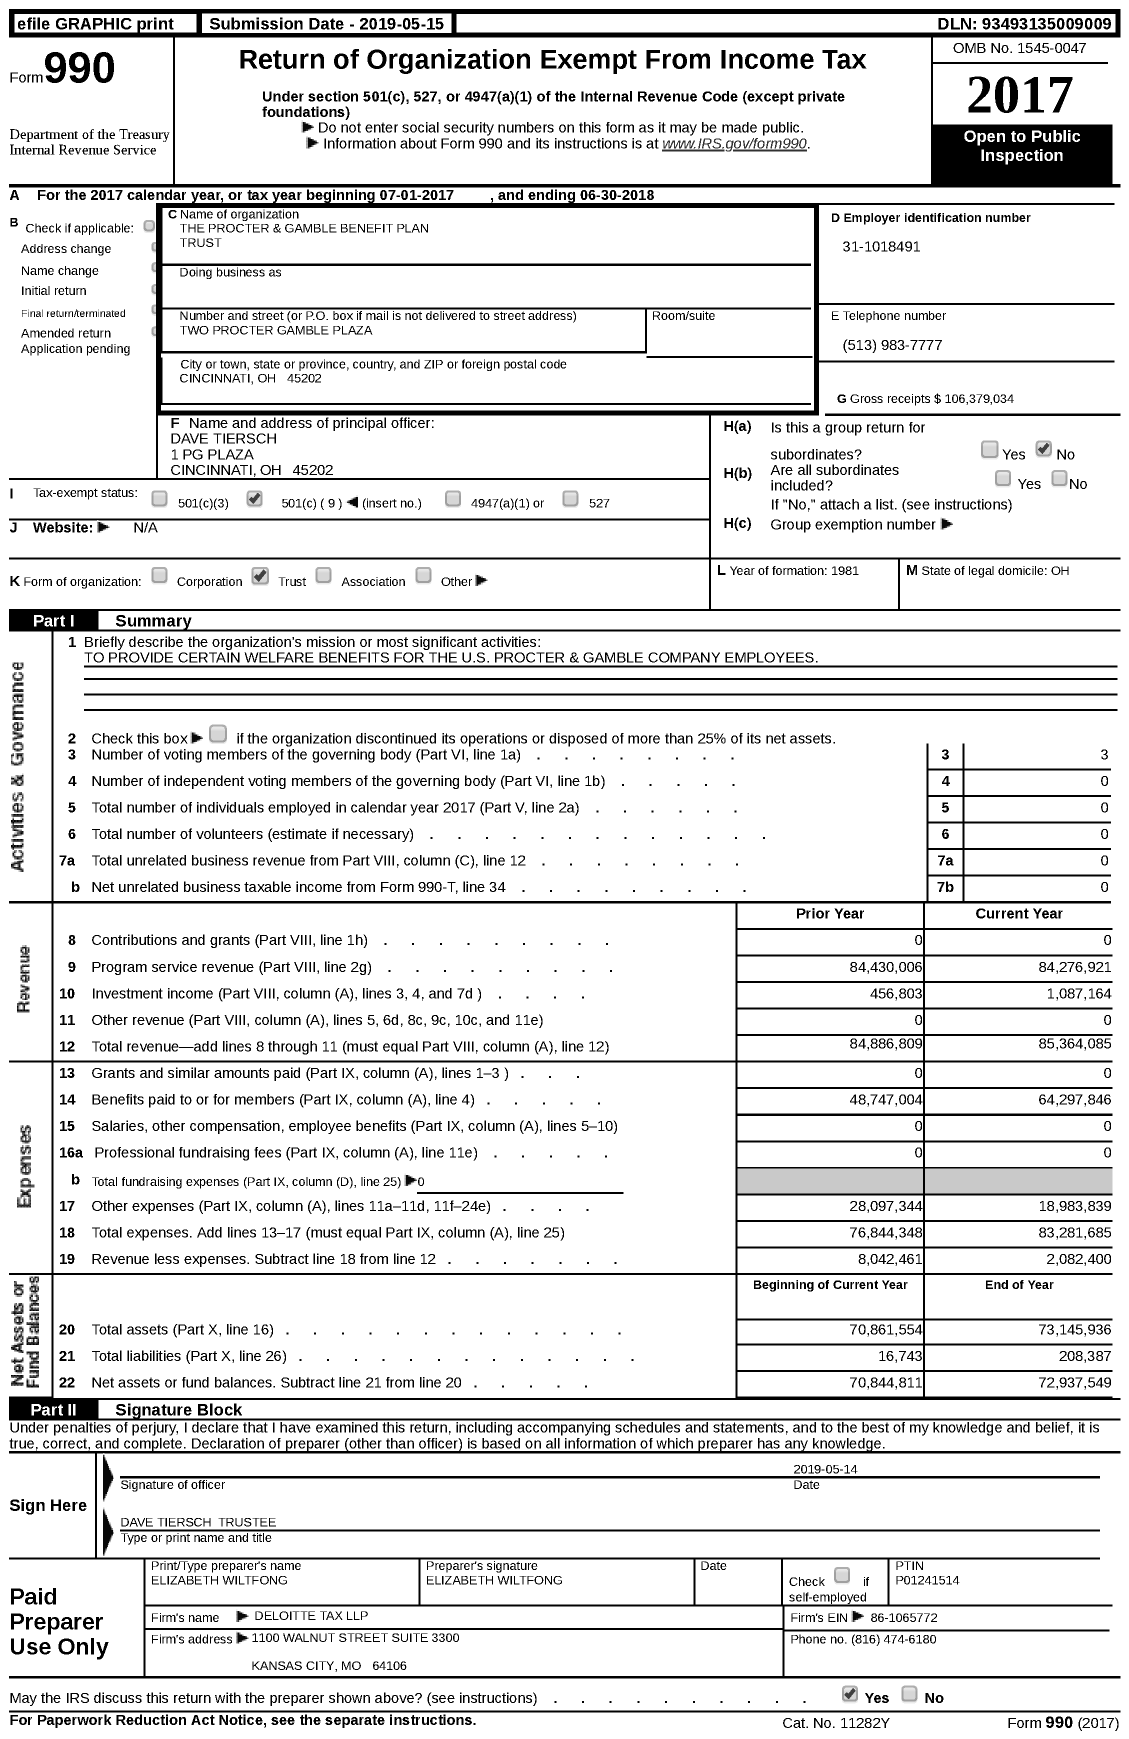 Image of first page of 2017 Form 990 for The Procter and Gamble Benefit Plan Trust